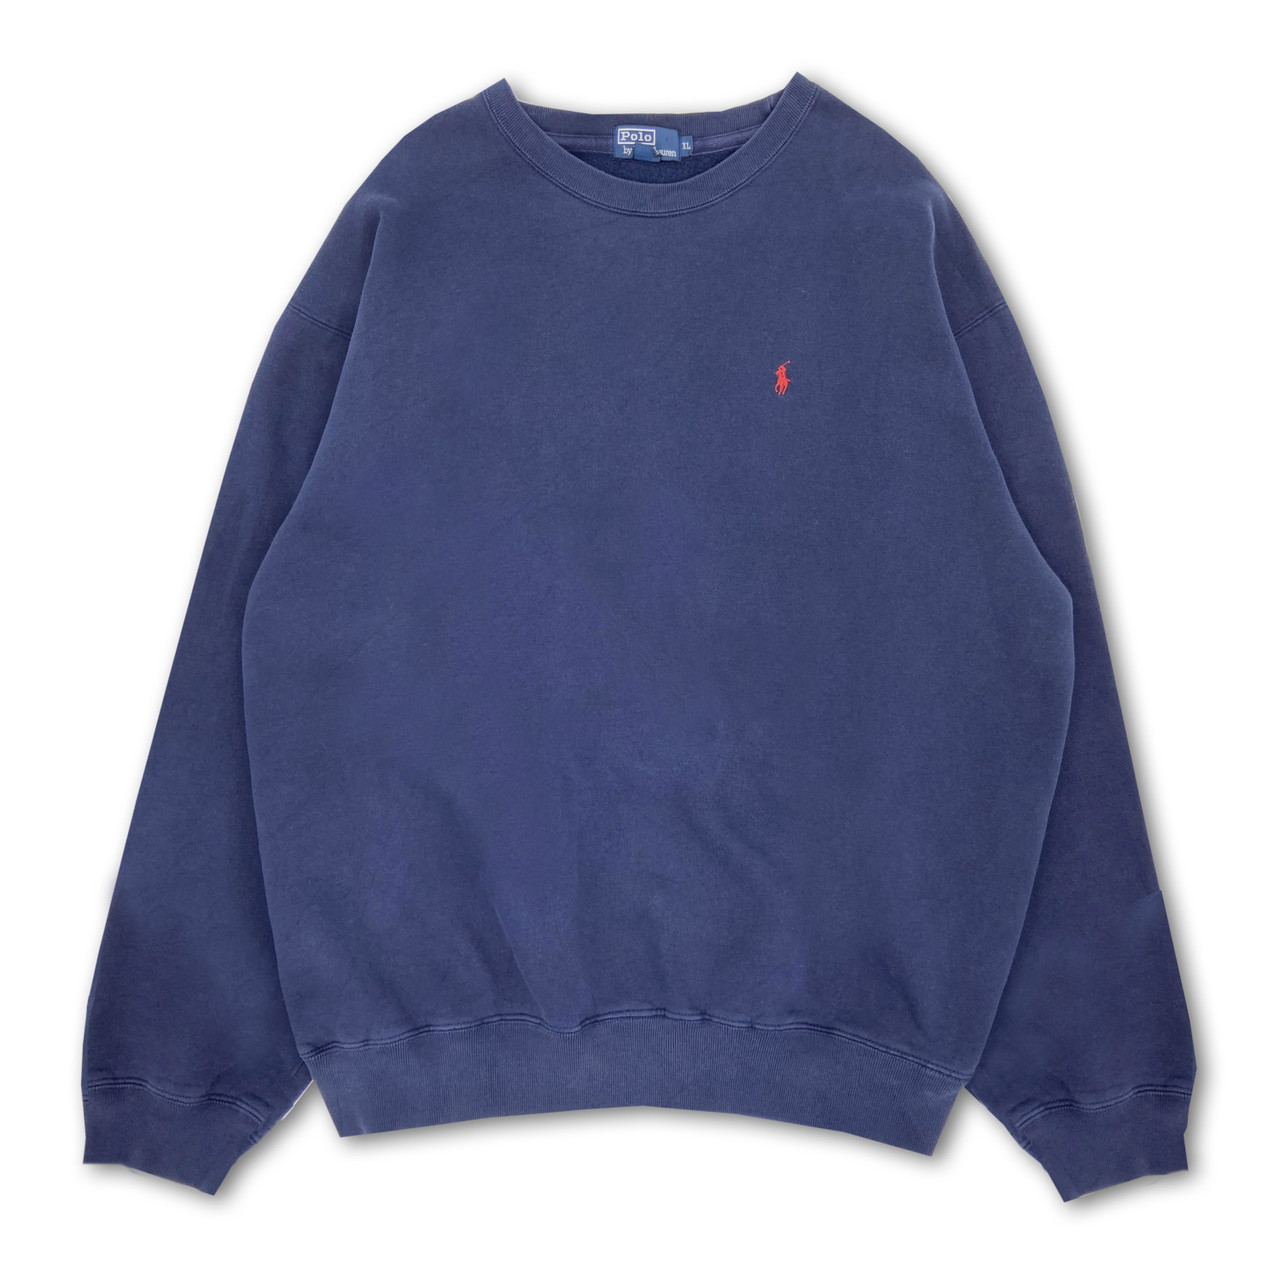 vintage polo sweater